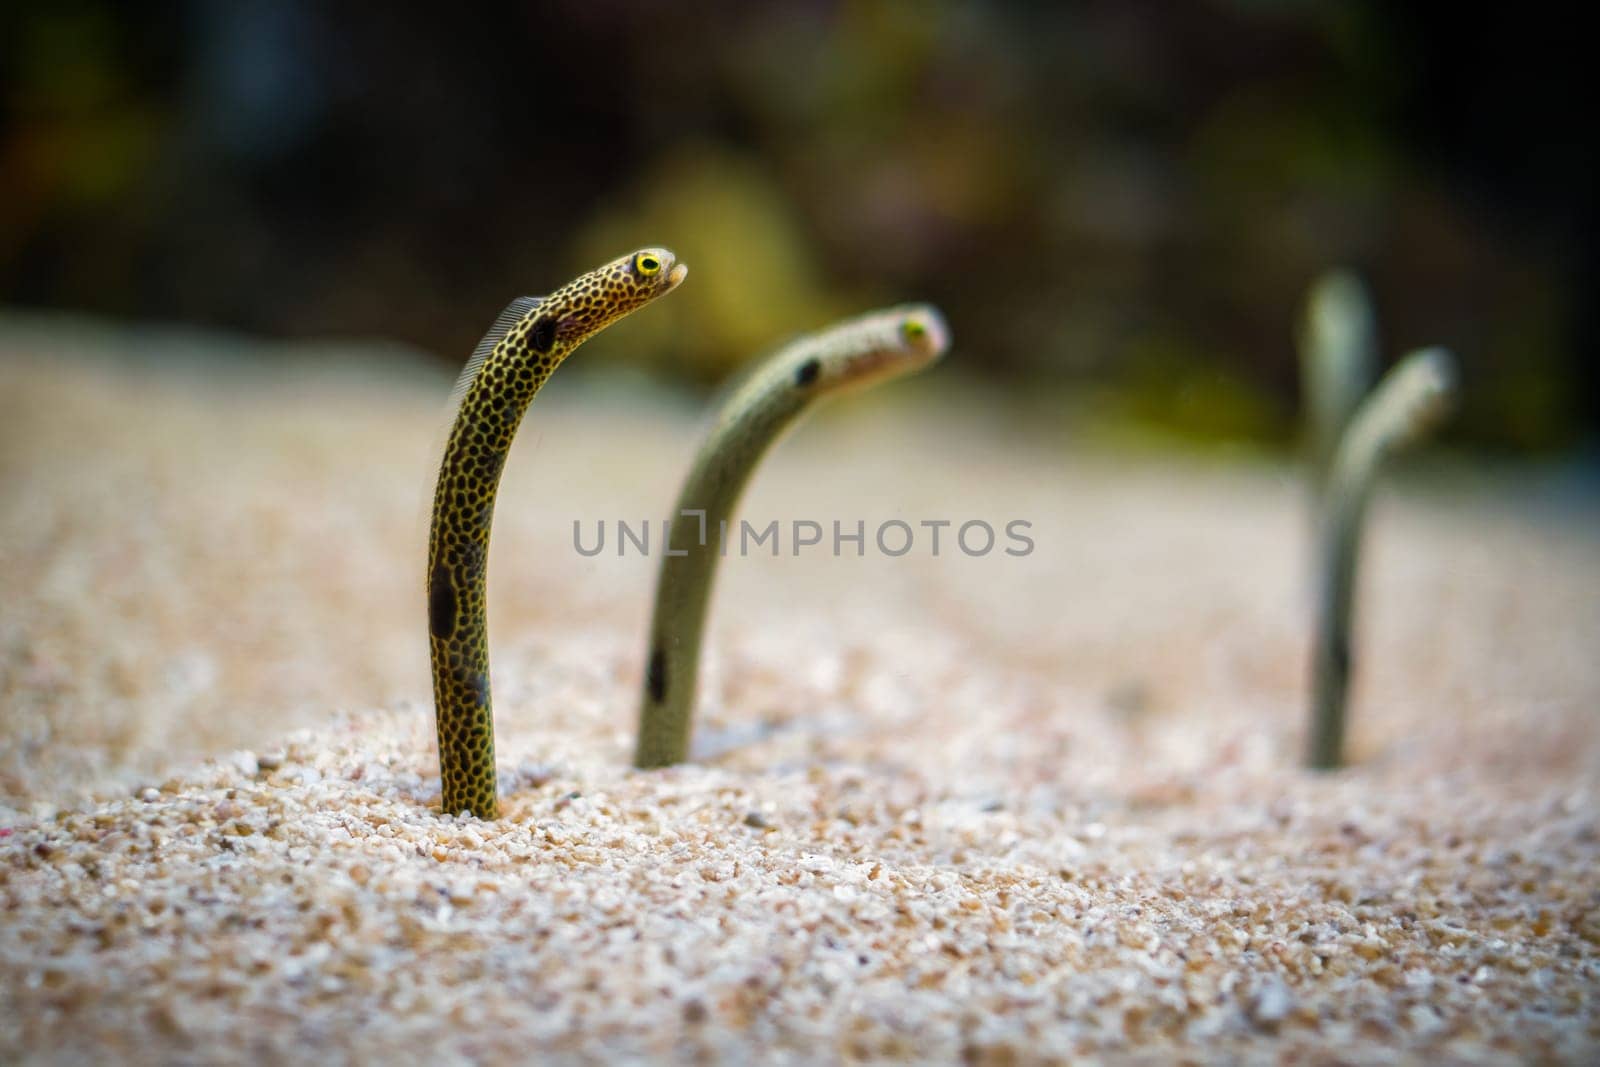 Spotted garden eel by dimol